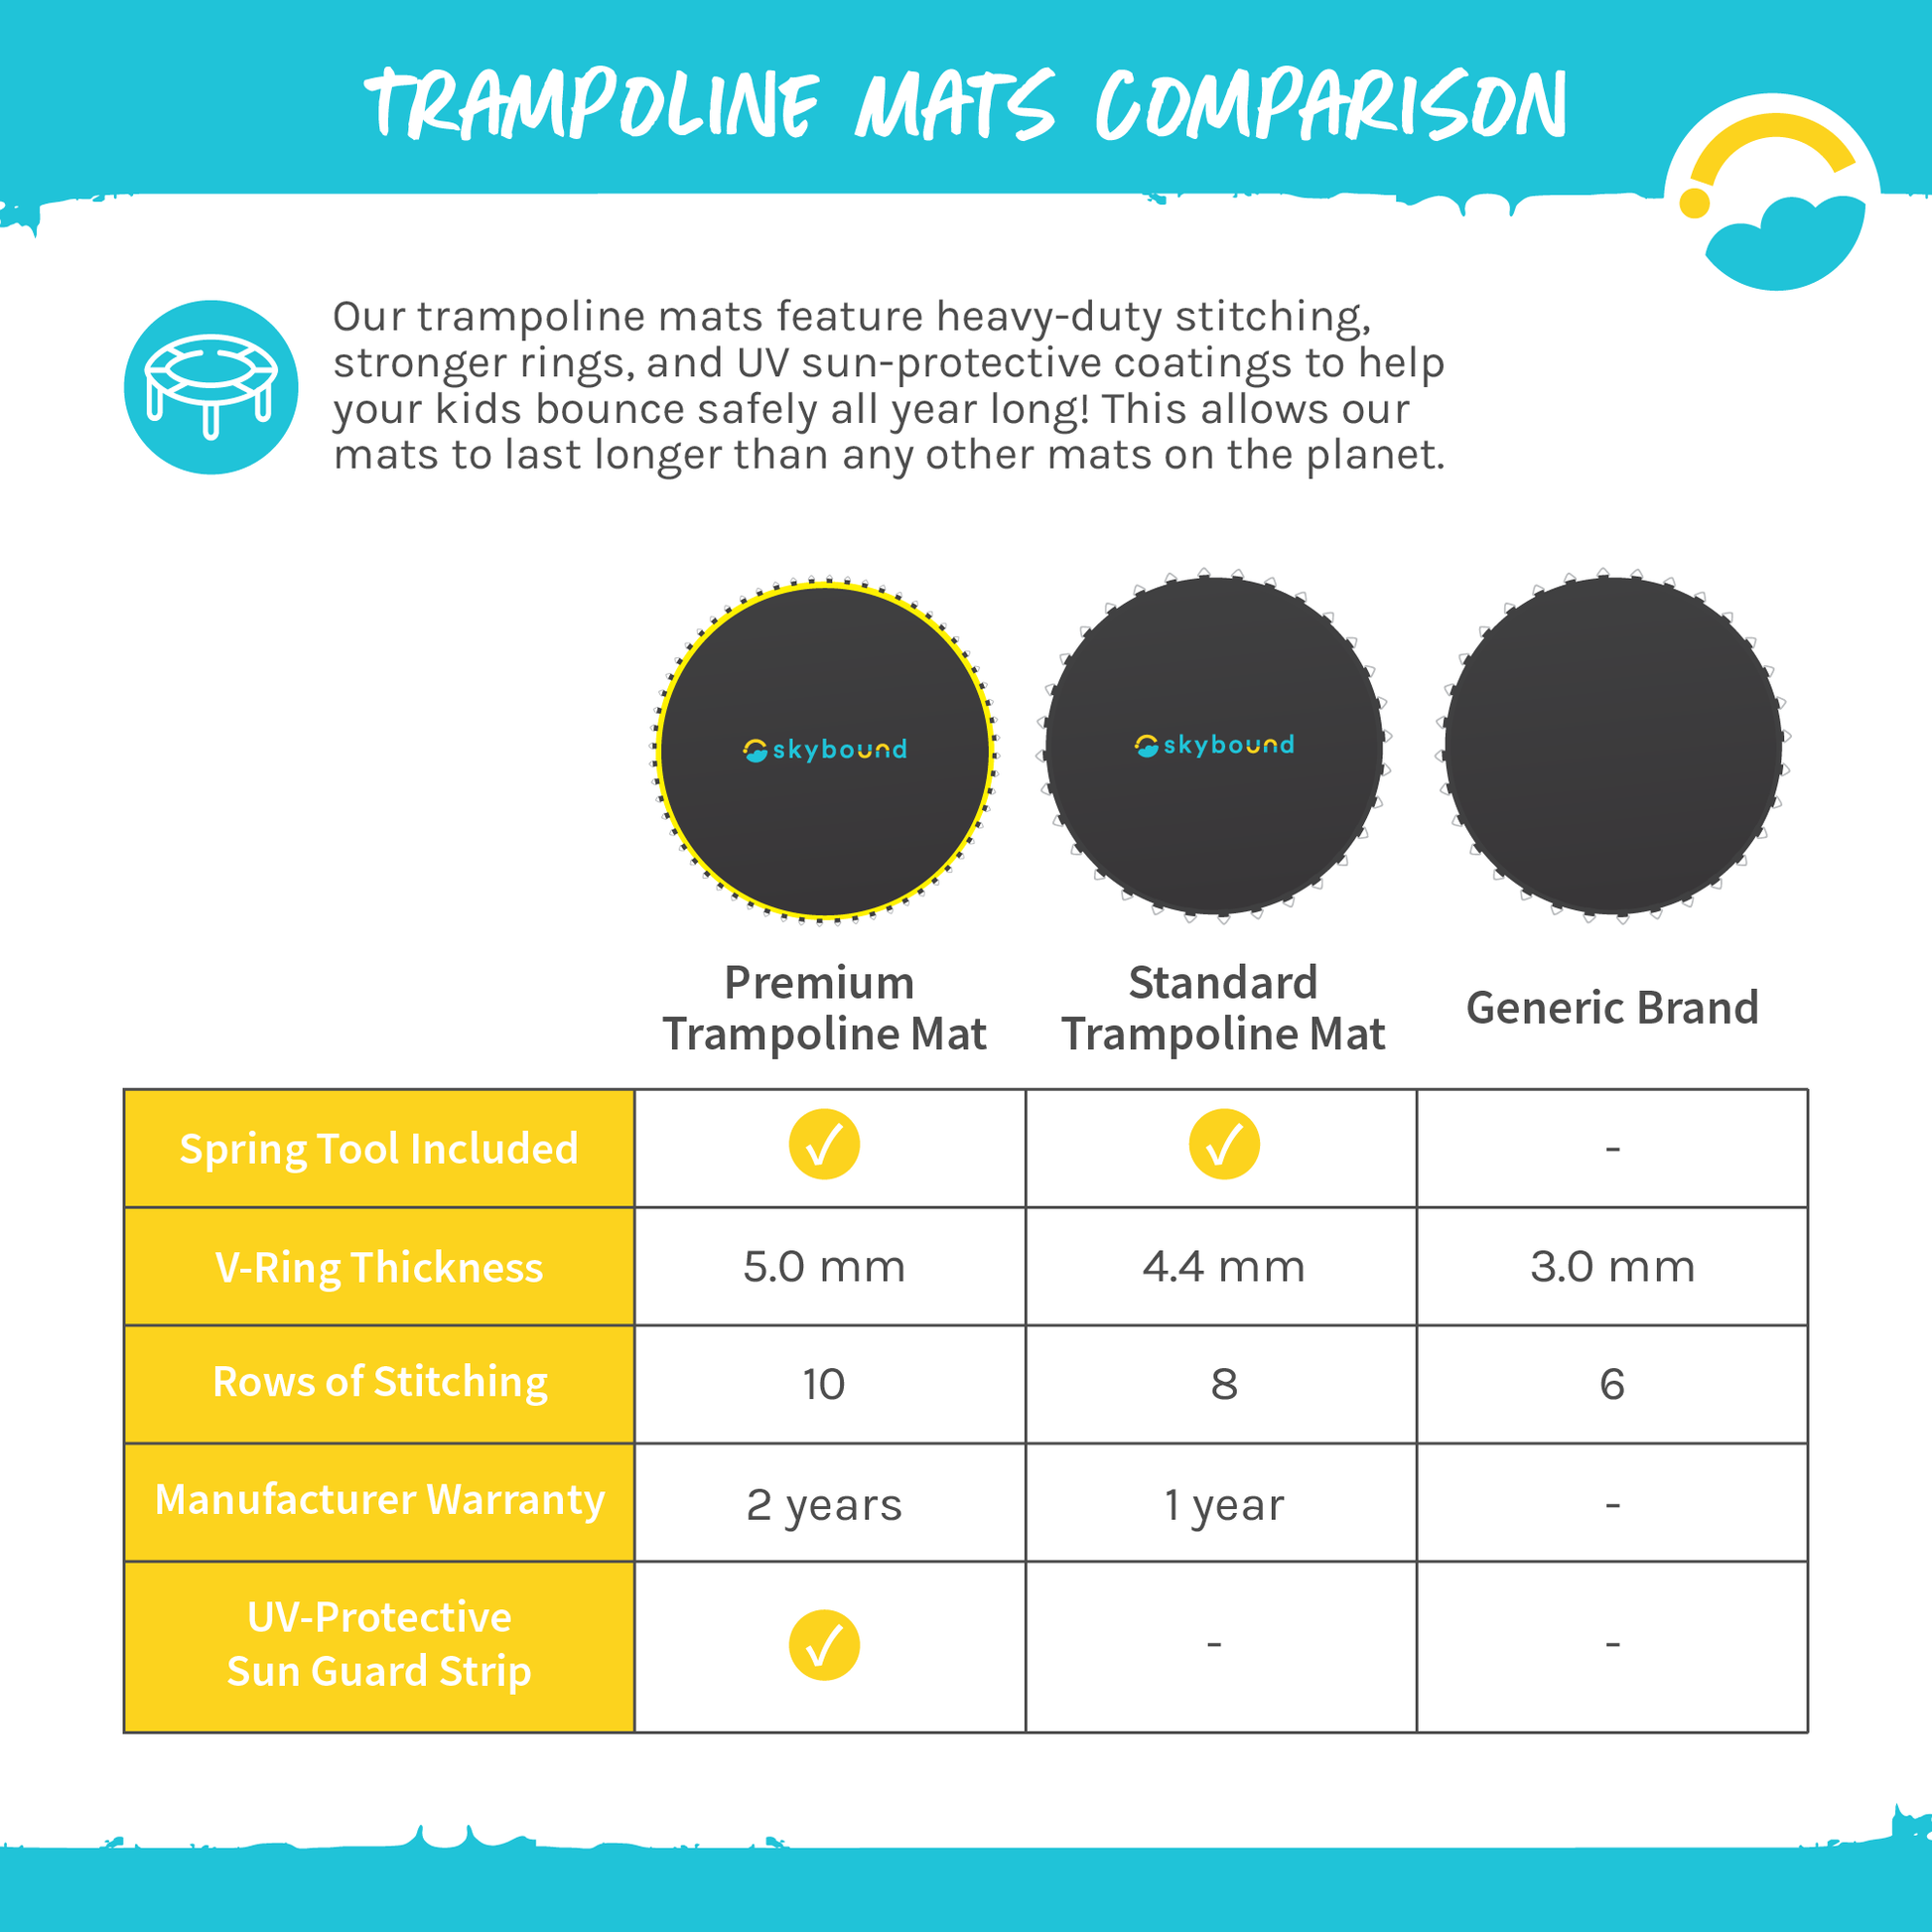 The Difference: A comparison chart between Premium Trampoline Mat, Standard Trampoline Mat, and Generic Brand.  Spring Tool Included: Yes, Yes, No.  V-Ring Thickness: 5.0 mm, 4.4 mm, 3.0 mm.  Rows of Stitching: 10,8,6.  Manufacturer Warranty: 2 Years, 1 Year, no Warranty.  UV-Protective Sun Guard Strip: Yes, No, No.  